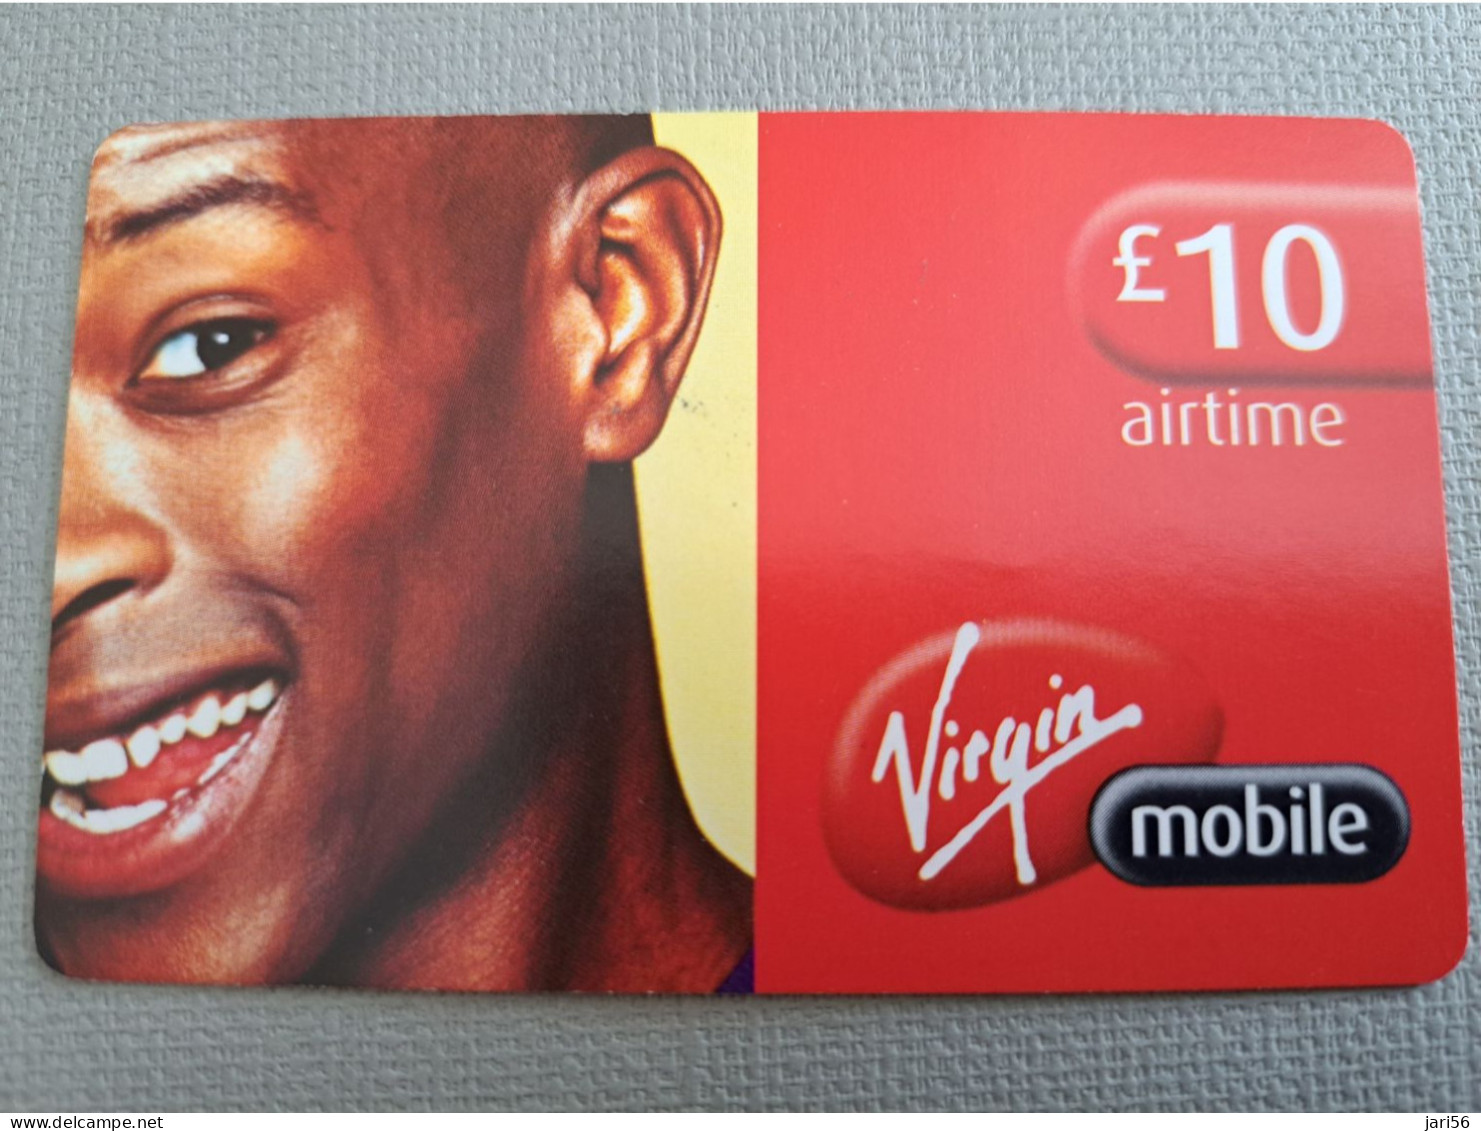 GREAT BRITAIN / 10 POUND  /PREPAID / VIRGIN MOBILE //FACE  PEOPLE ON CARD / FINE USED    **15066** - [10] Colecciones